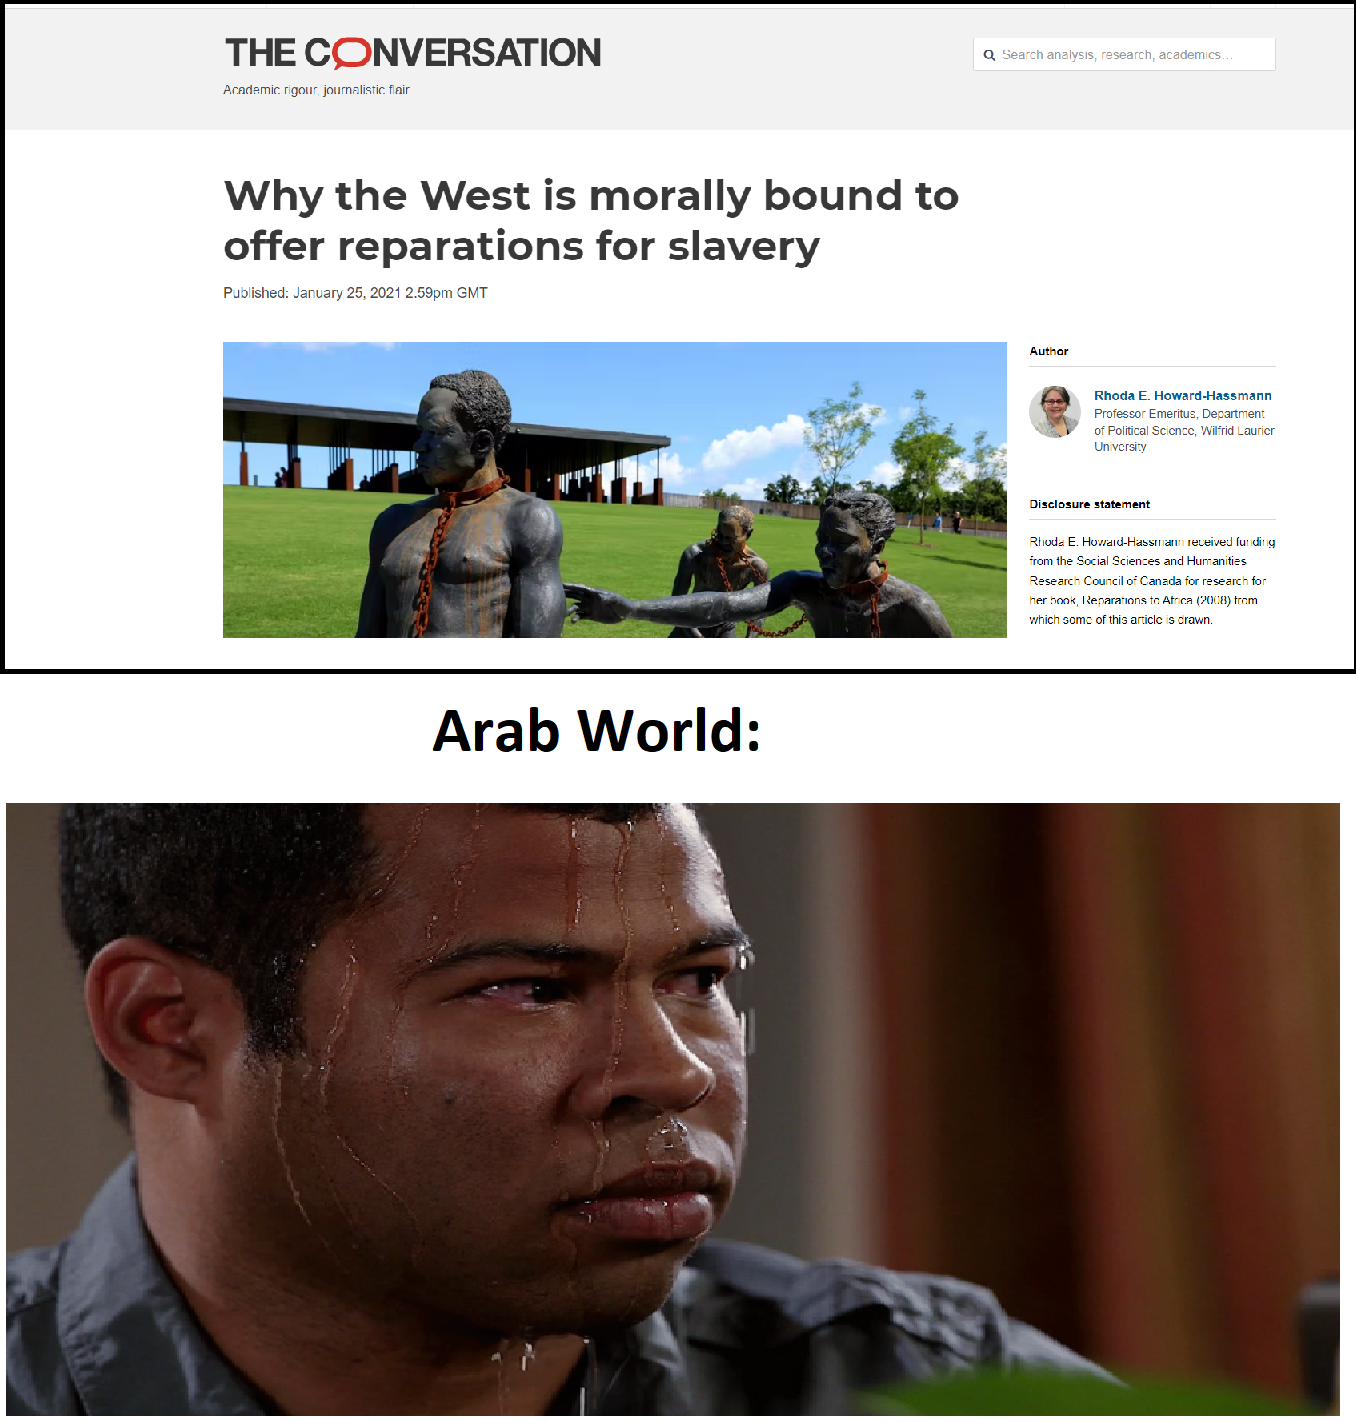 can't believe the west invented slavery